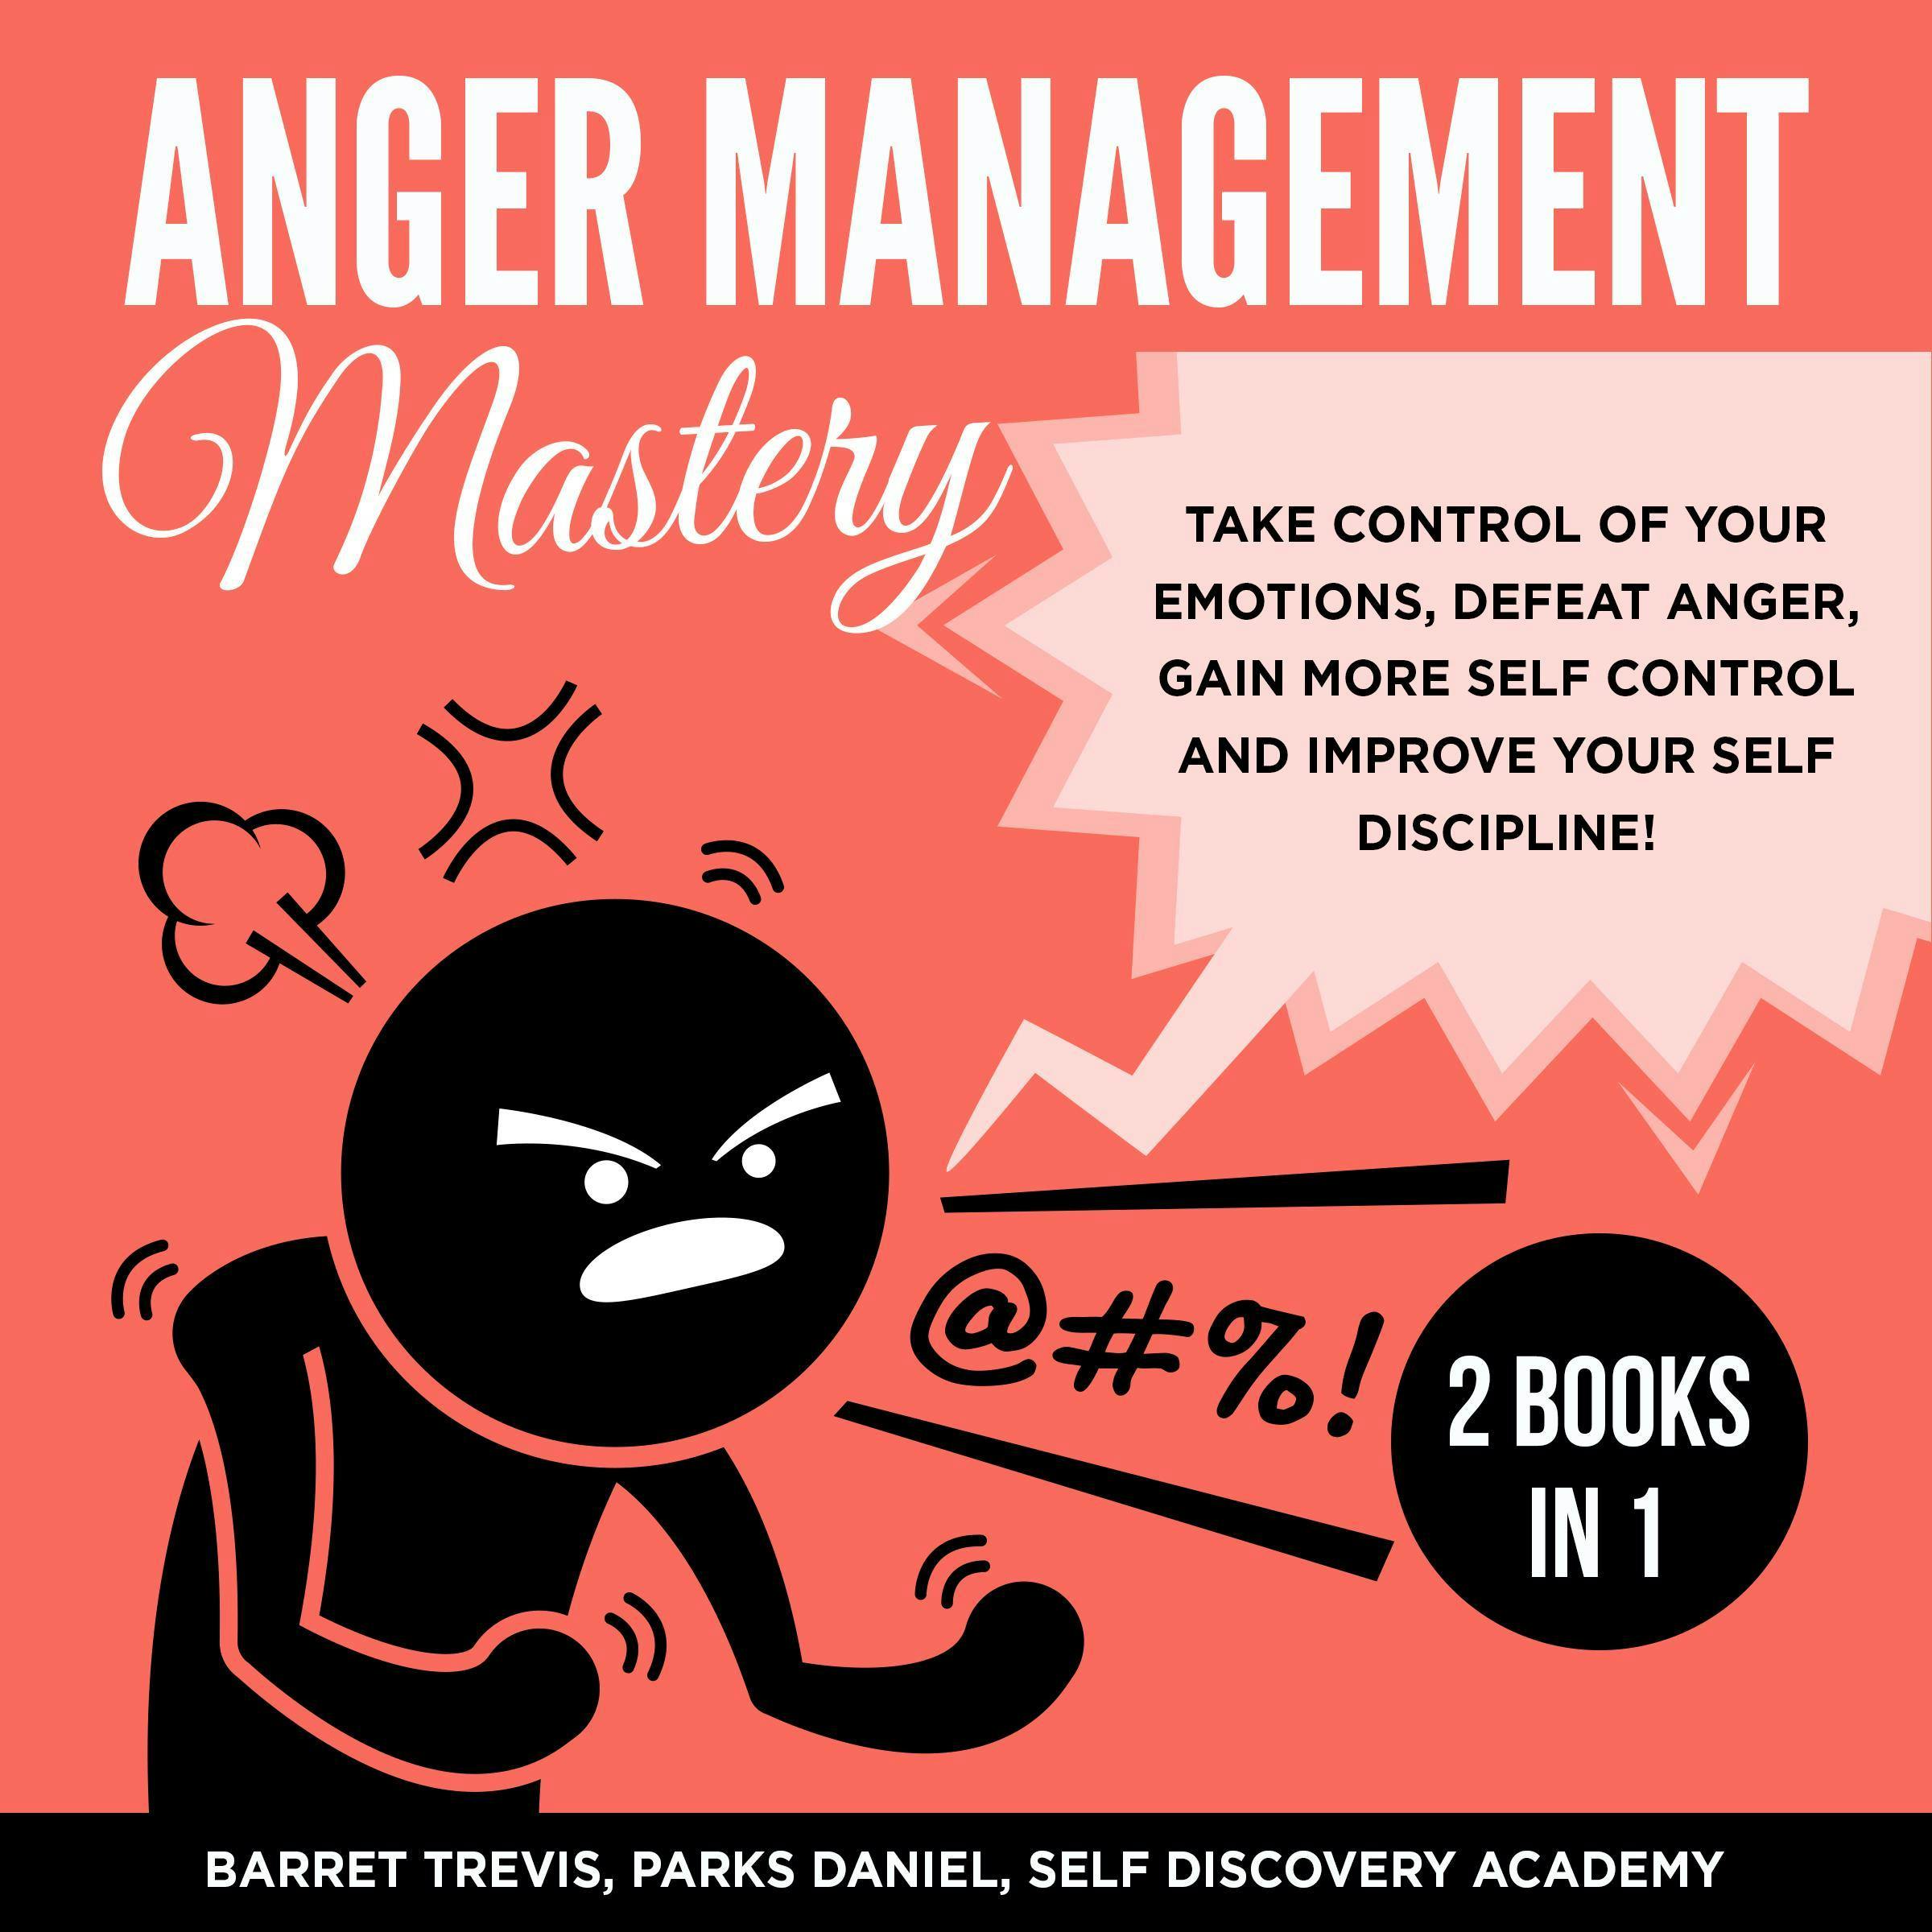 Anger Management Mastery: Take Control of Your Emotions, Defeat Anger, Gain More Self Control And Improve Your Self Discipline!, 2 Books in 1 - undefined